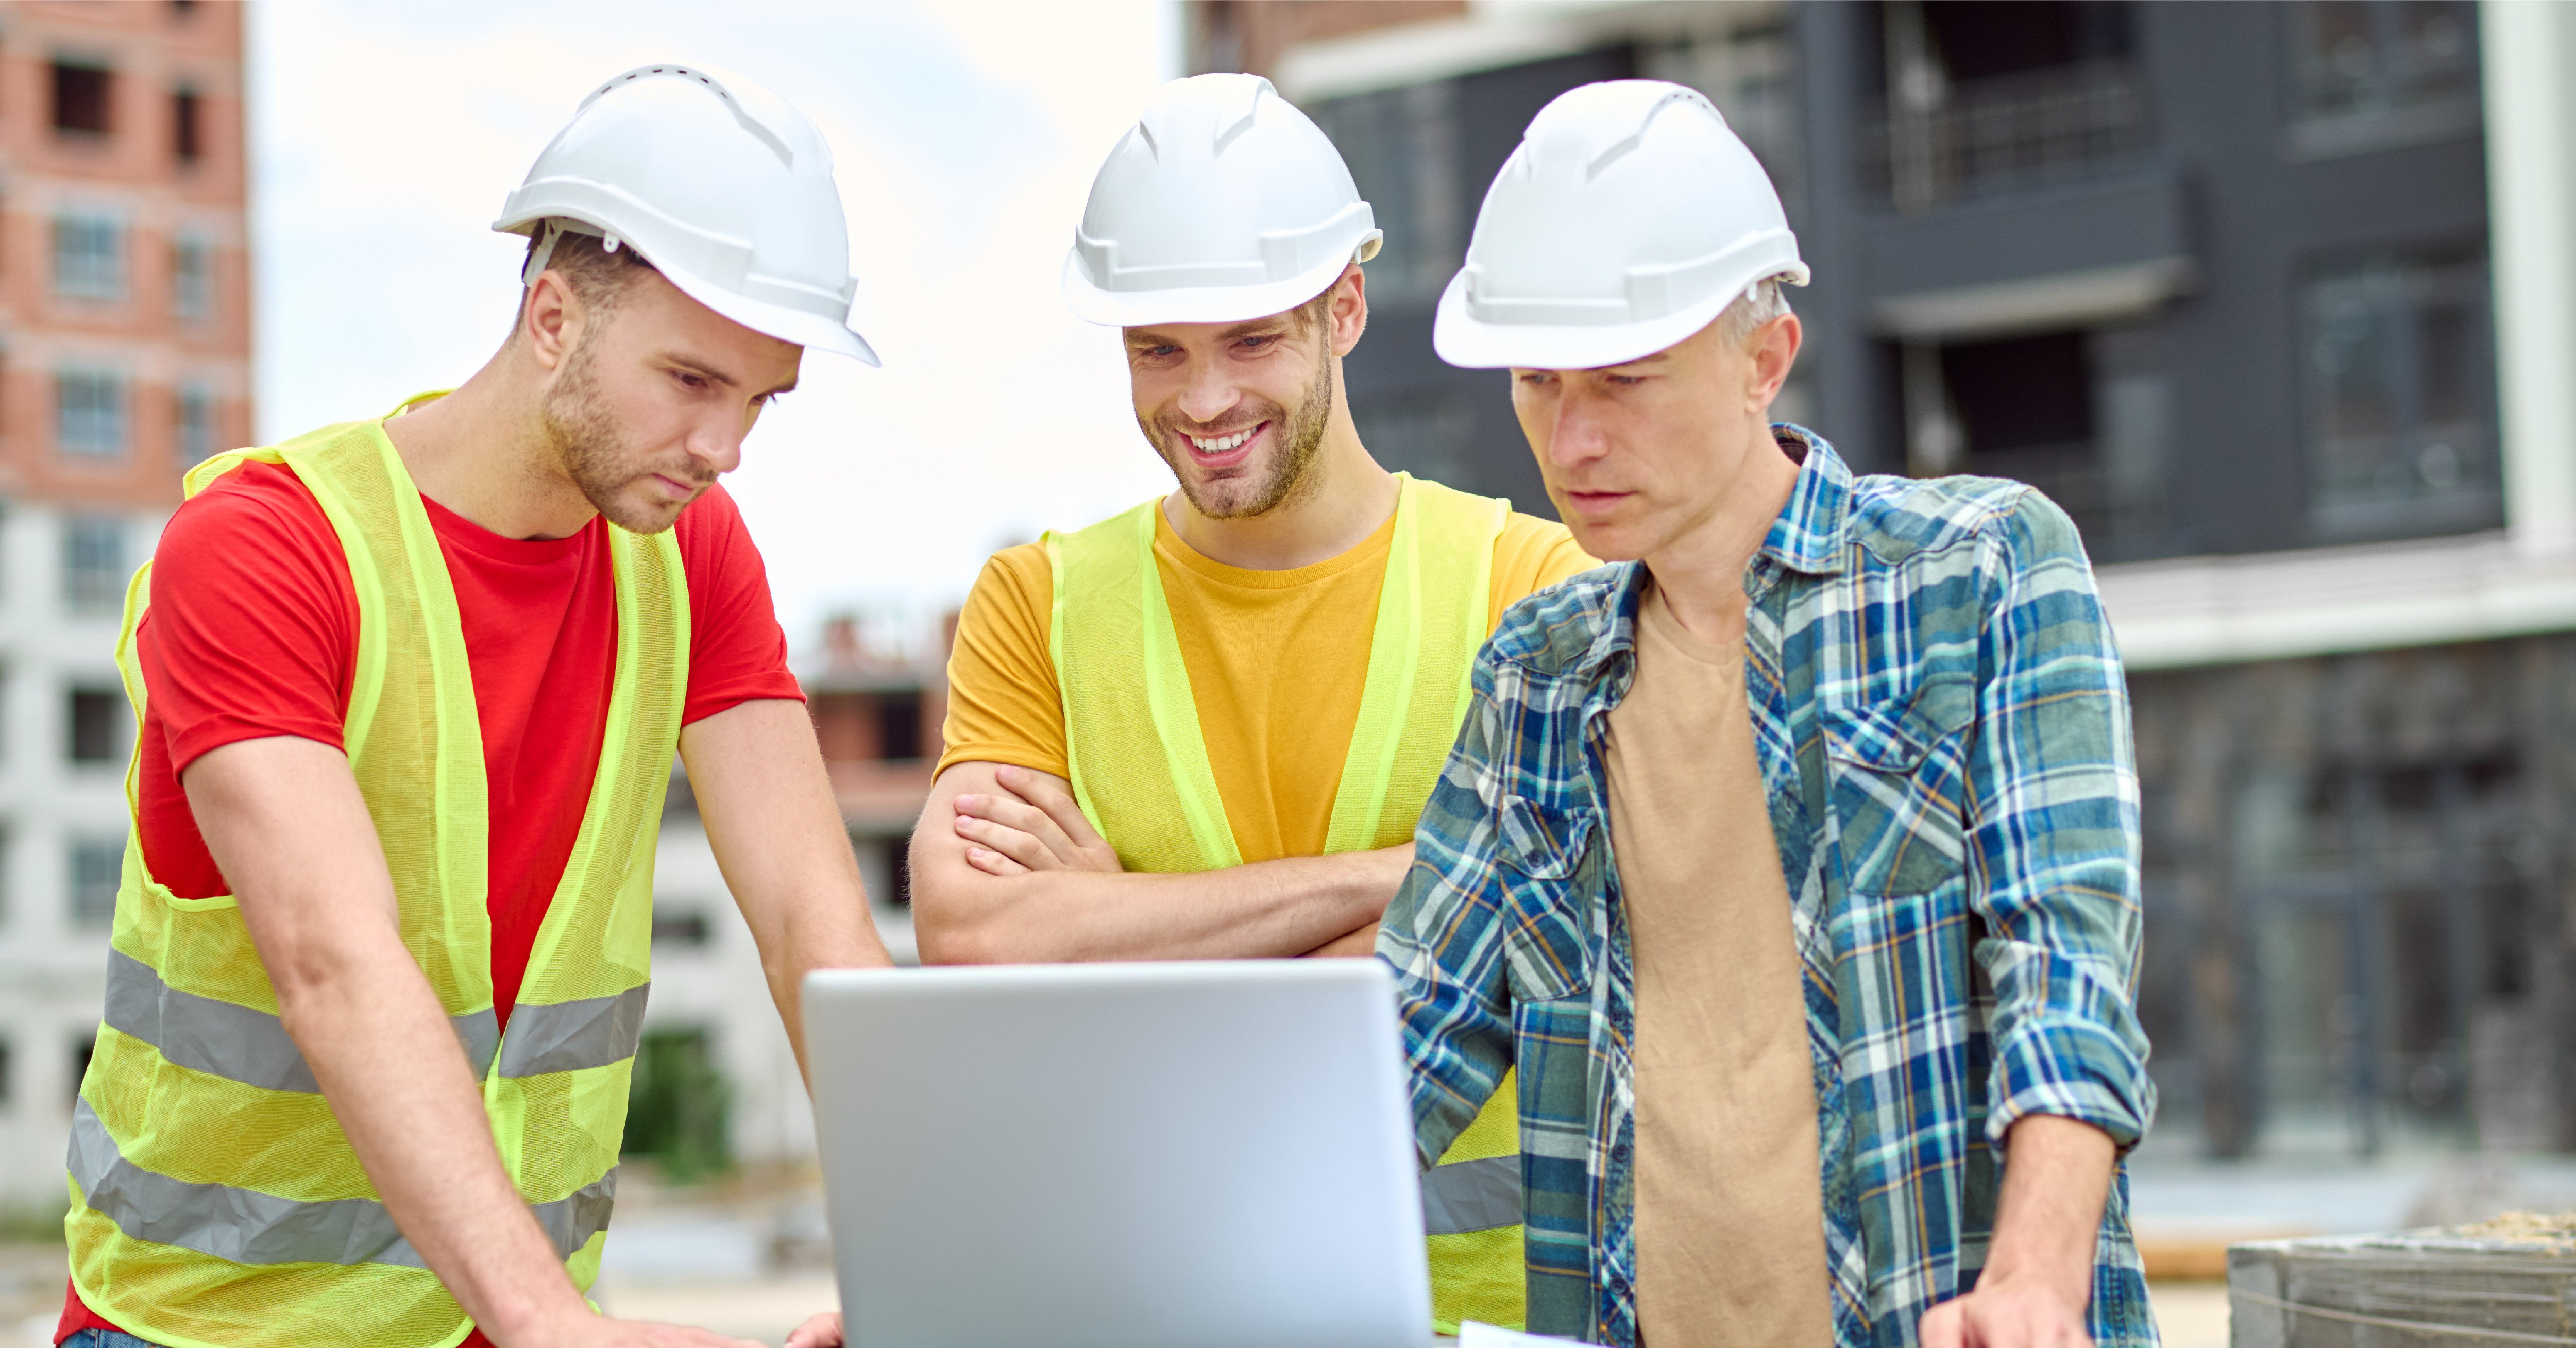 Construction team looking at a laptop on commercial site